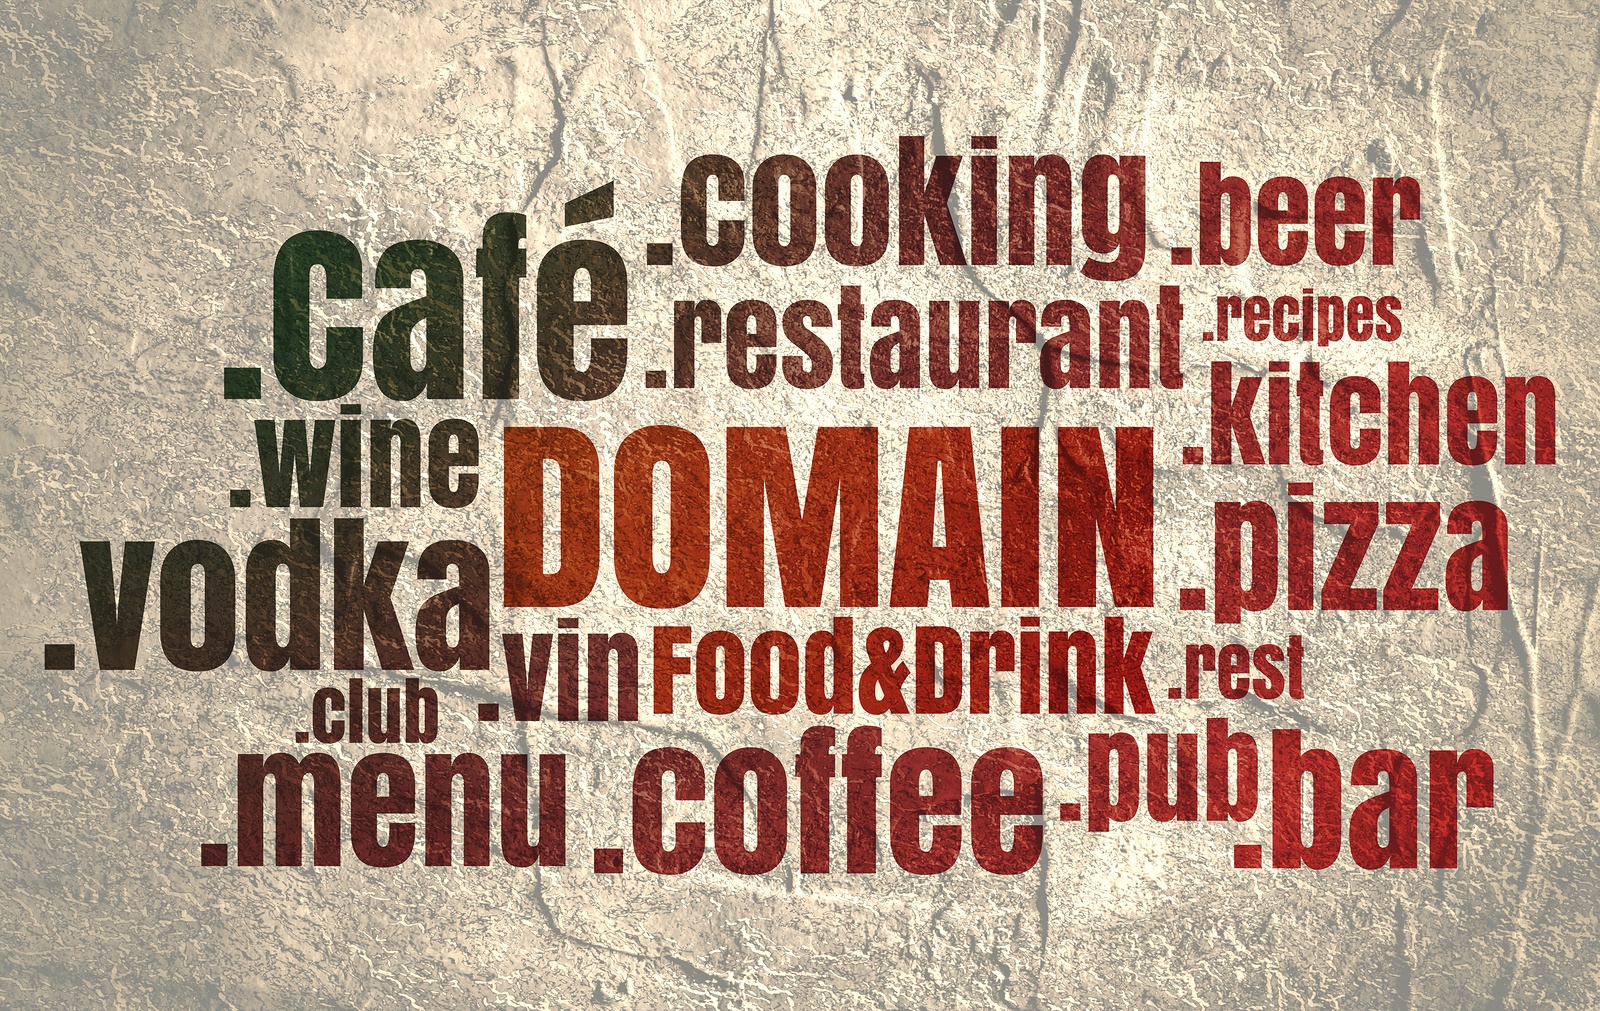 New Top Level Domains